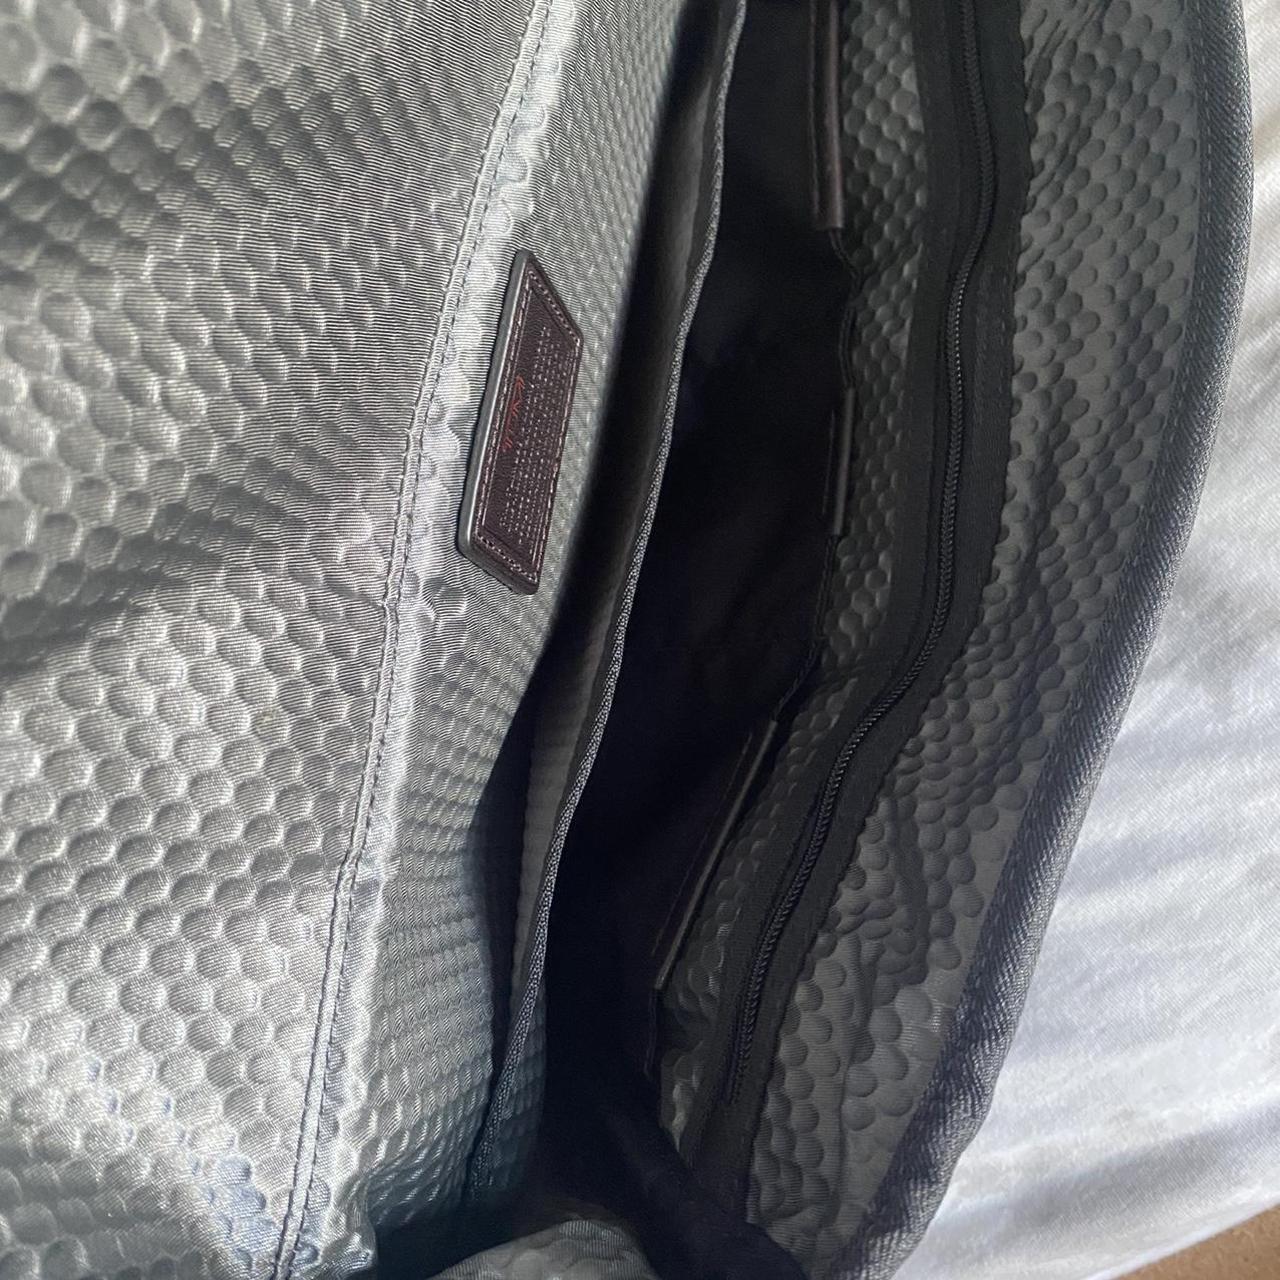 Product Image 3 - Tumi Messenger Bag

Like new condition

Lots